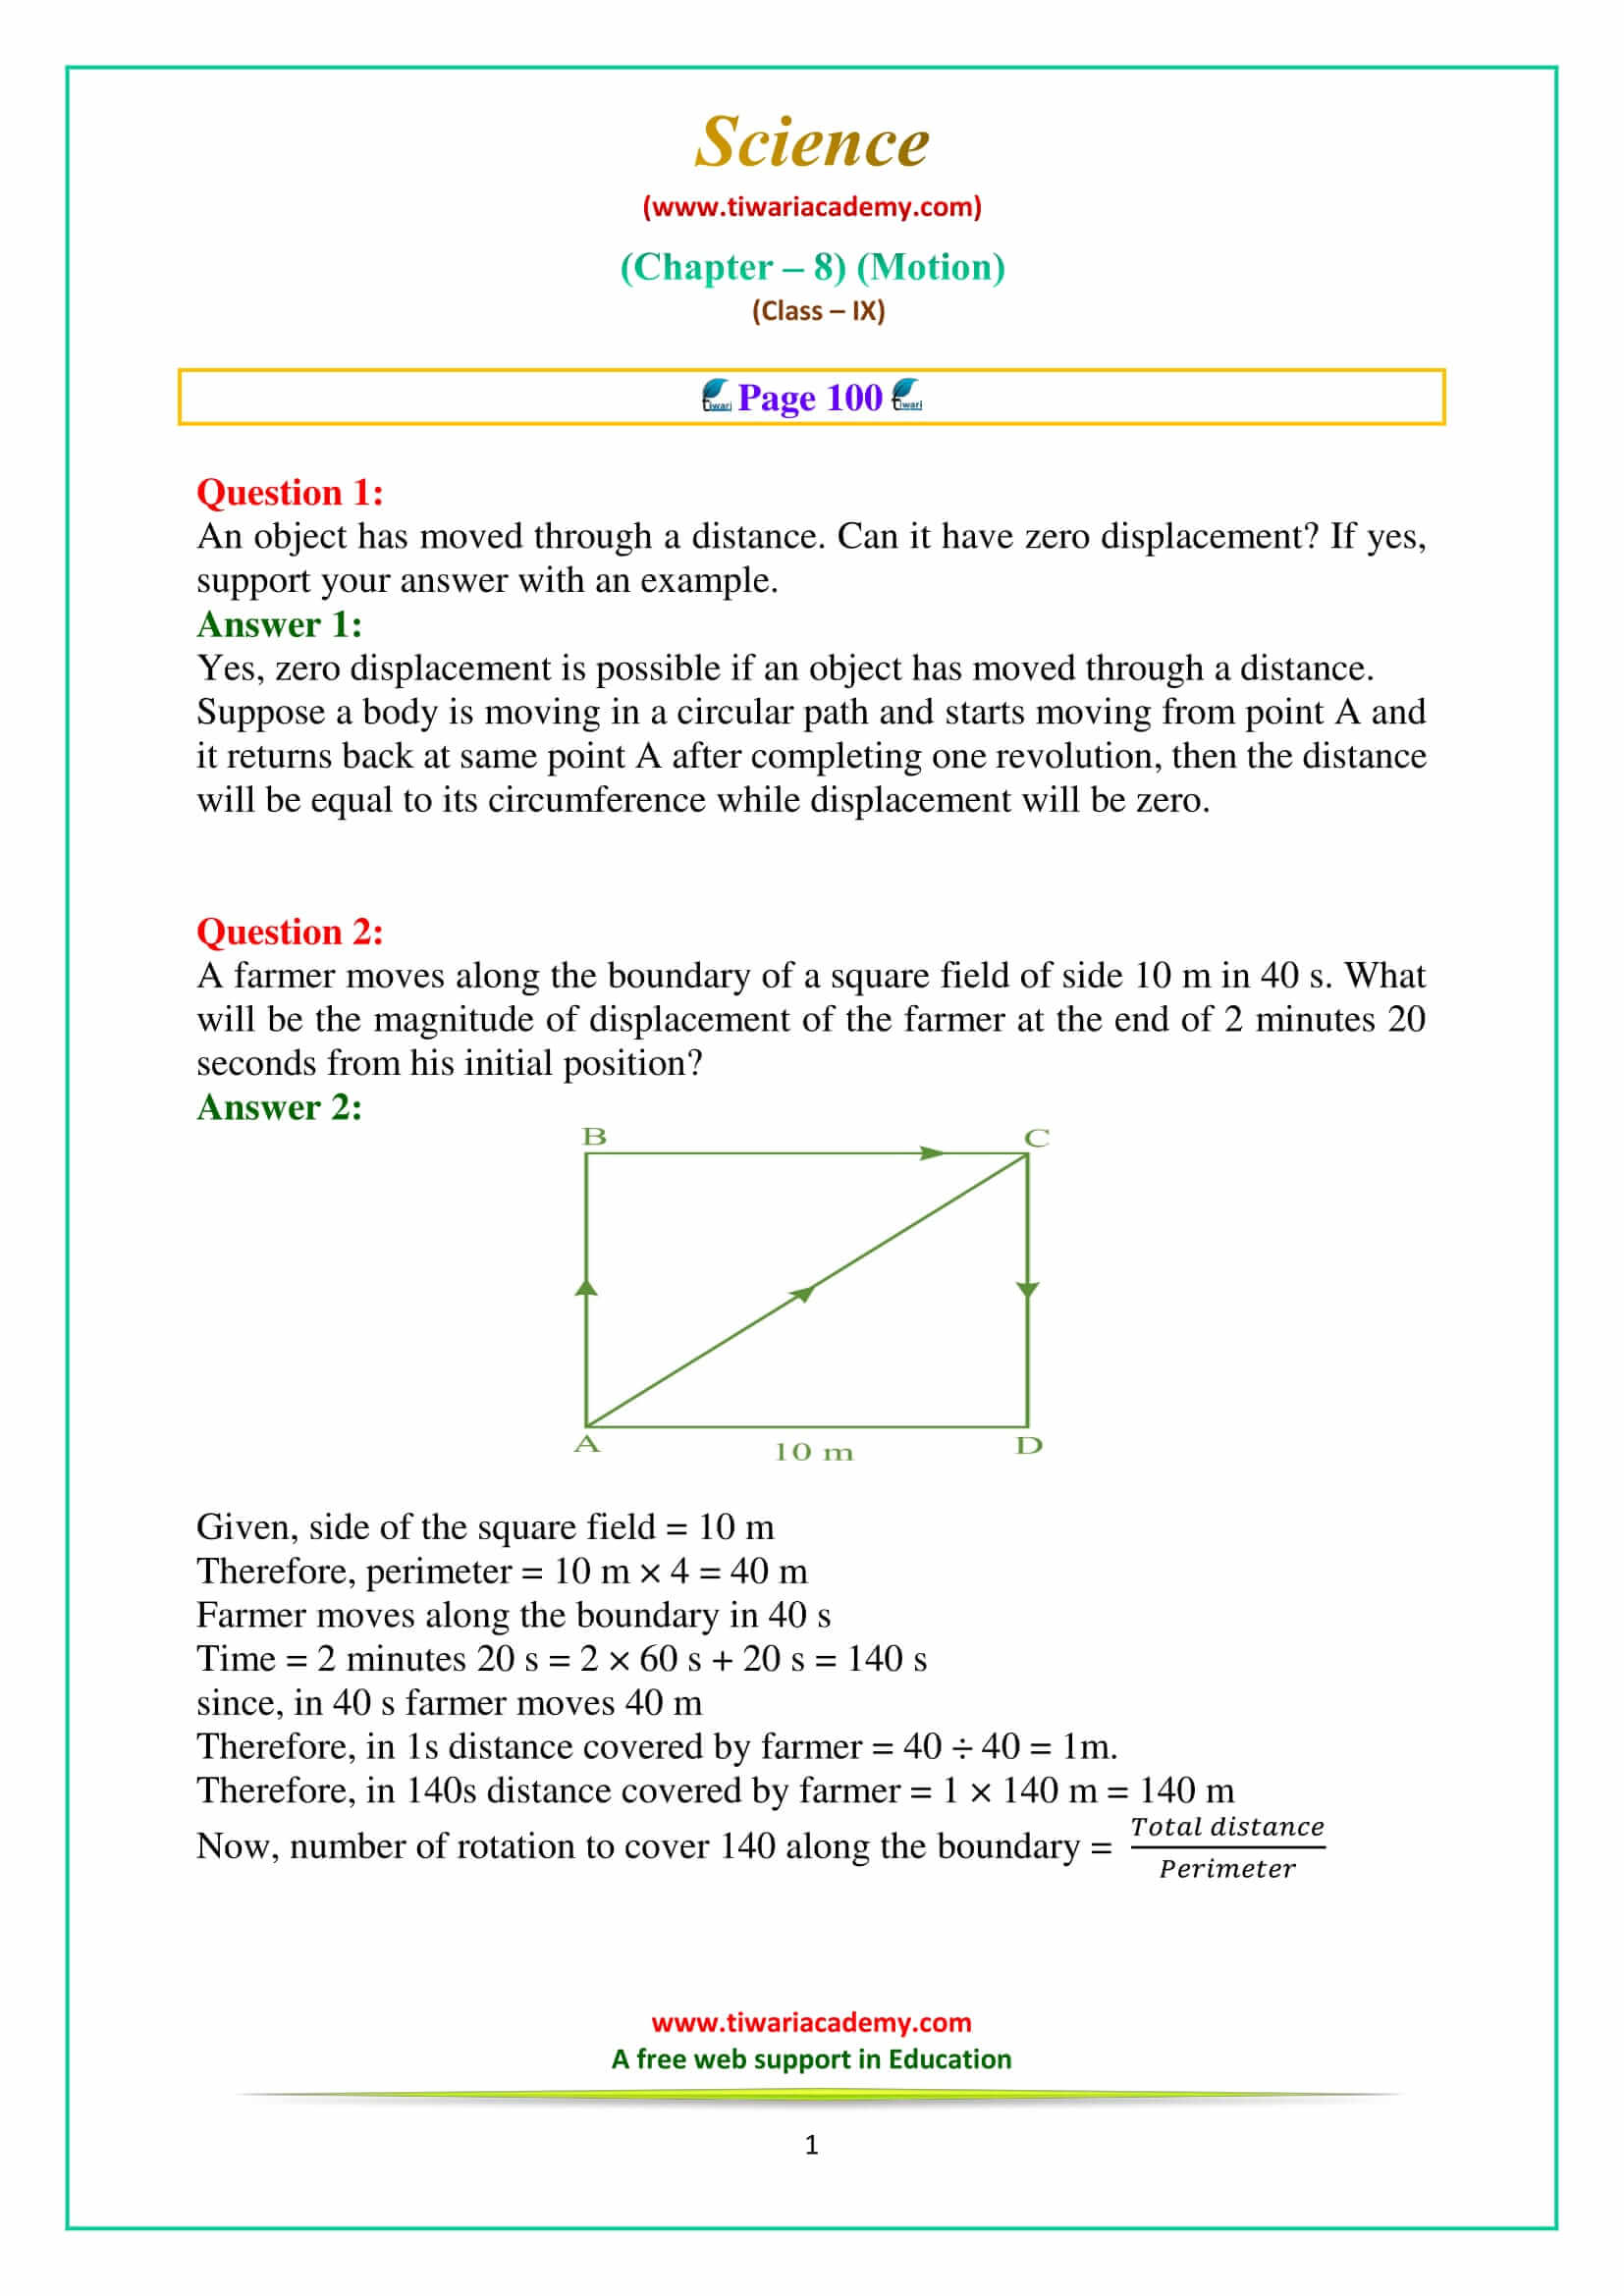 NCERT Solutions for Class 9 Science Chapter 8 Motion Intext Questions on Page 100 Answers